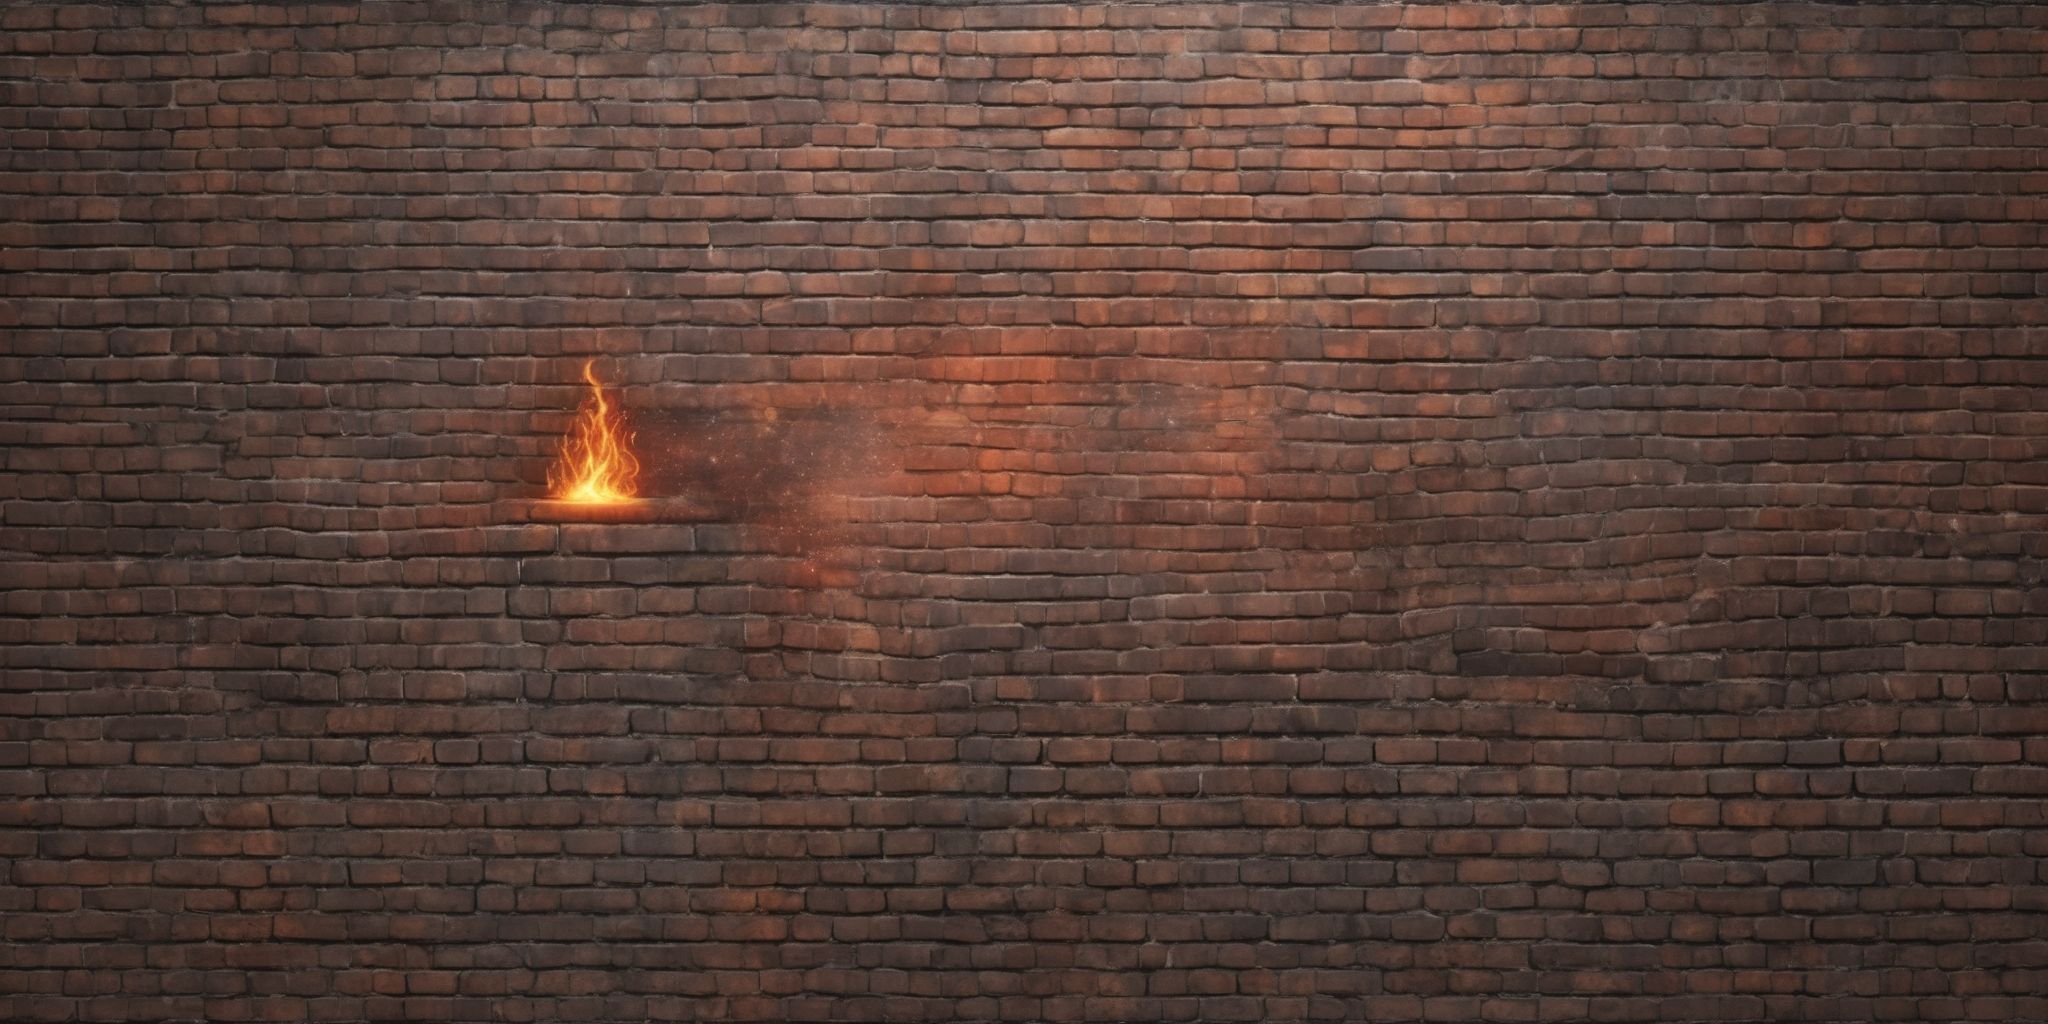 Firewall  in realistic, photographic style